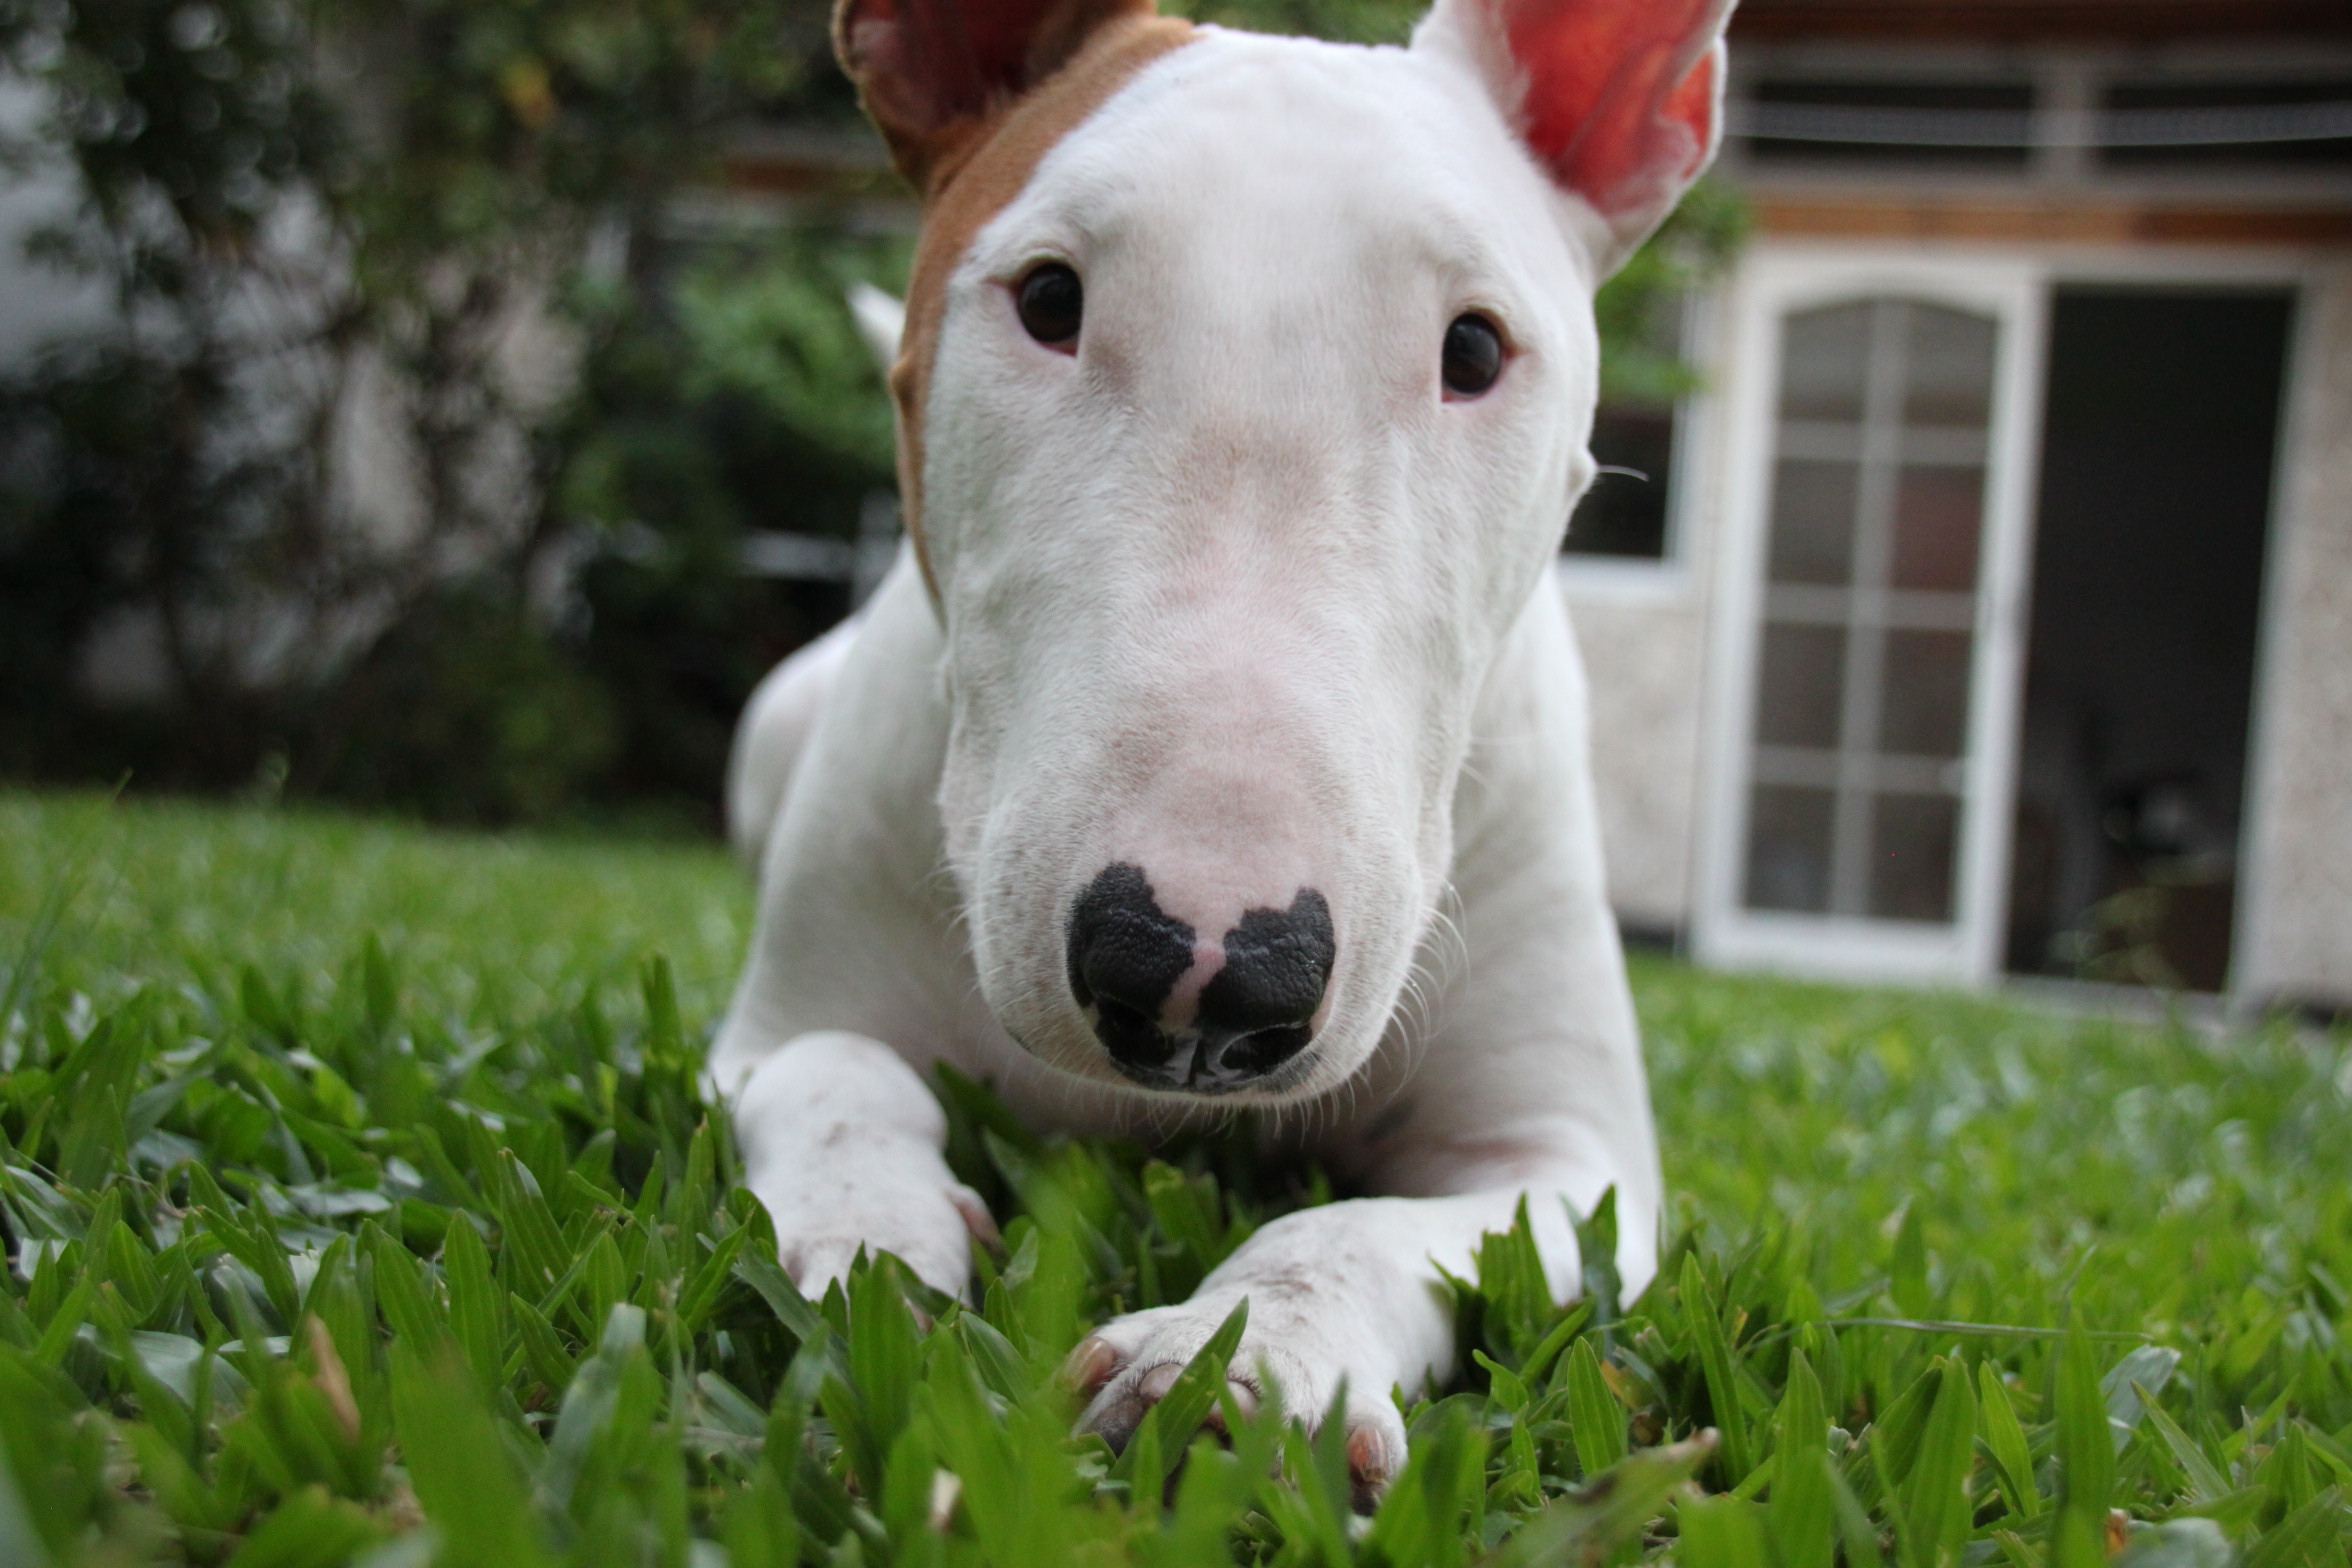 How Much Should My Bull Terrier Puppy Be Feeding?